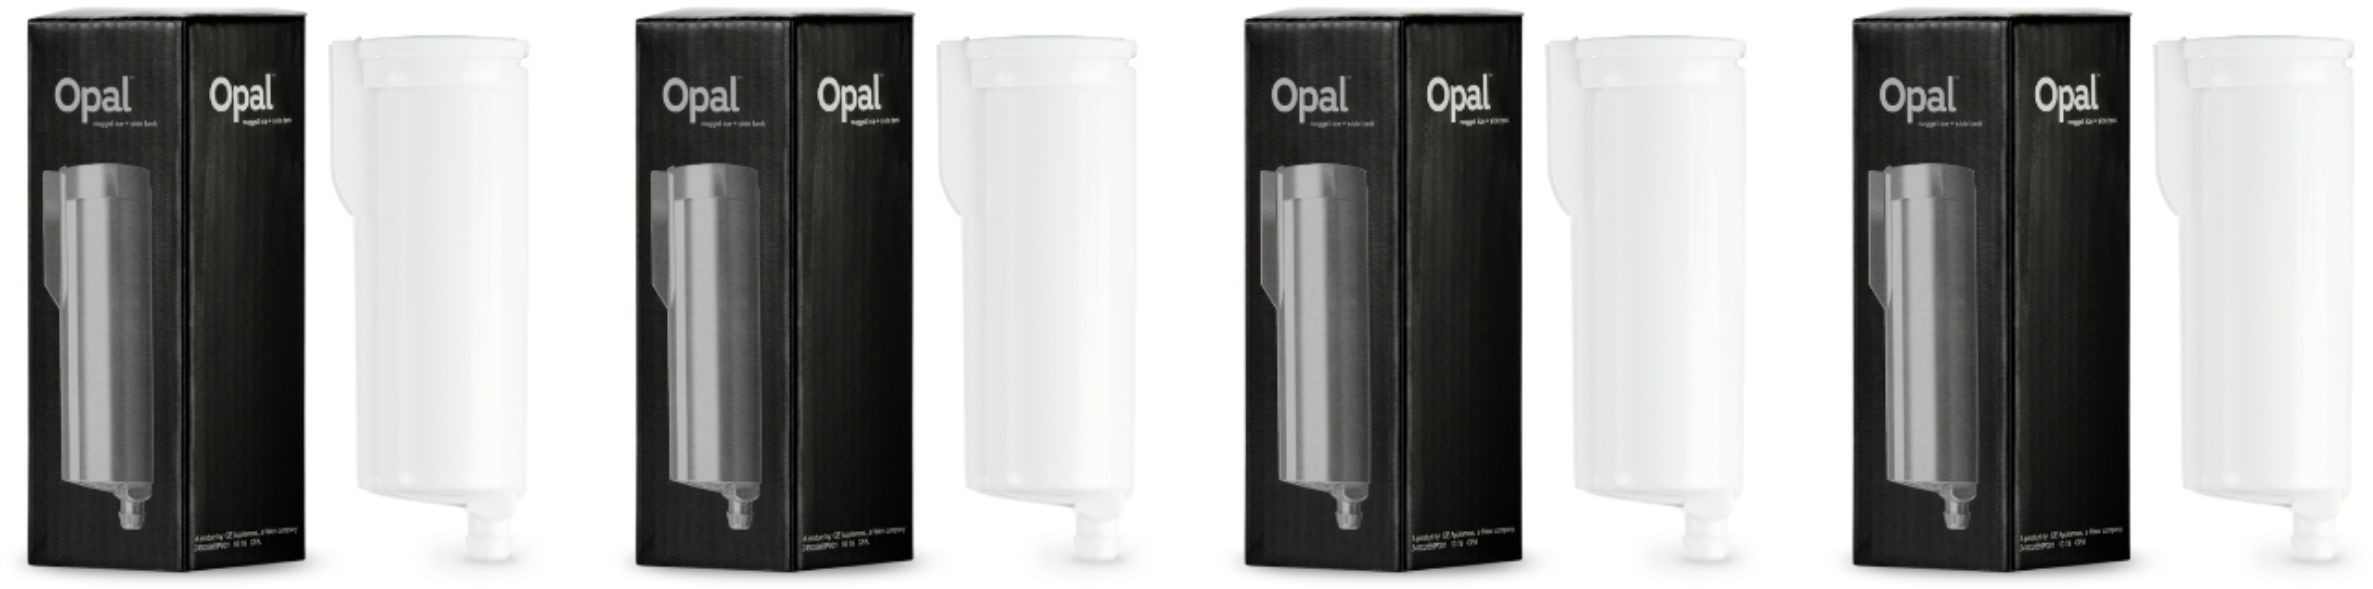 P4INKFILTR by GE Appliances - GE PROFILE™ OPAL™ NUGGET ICE MAKER - WATER  FILTER ACCESSORY